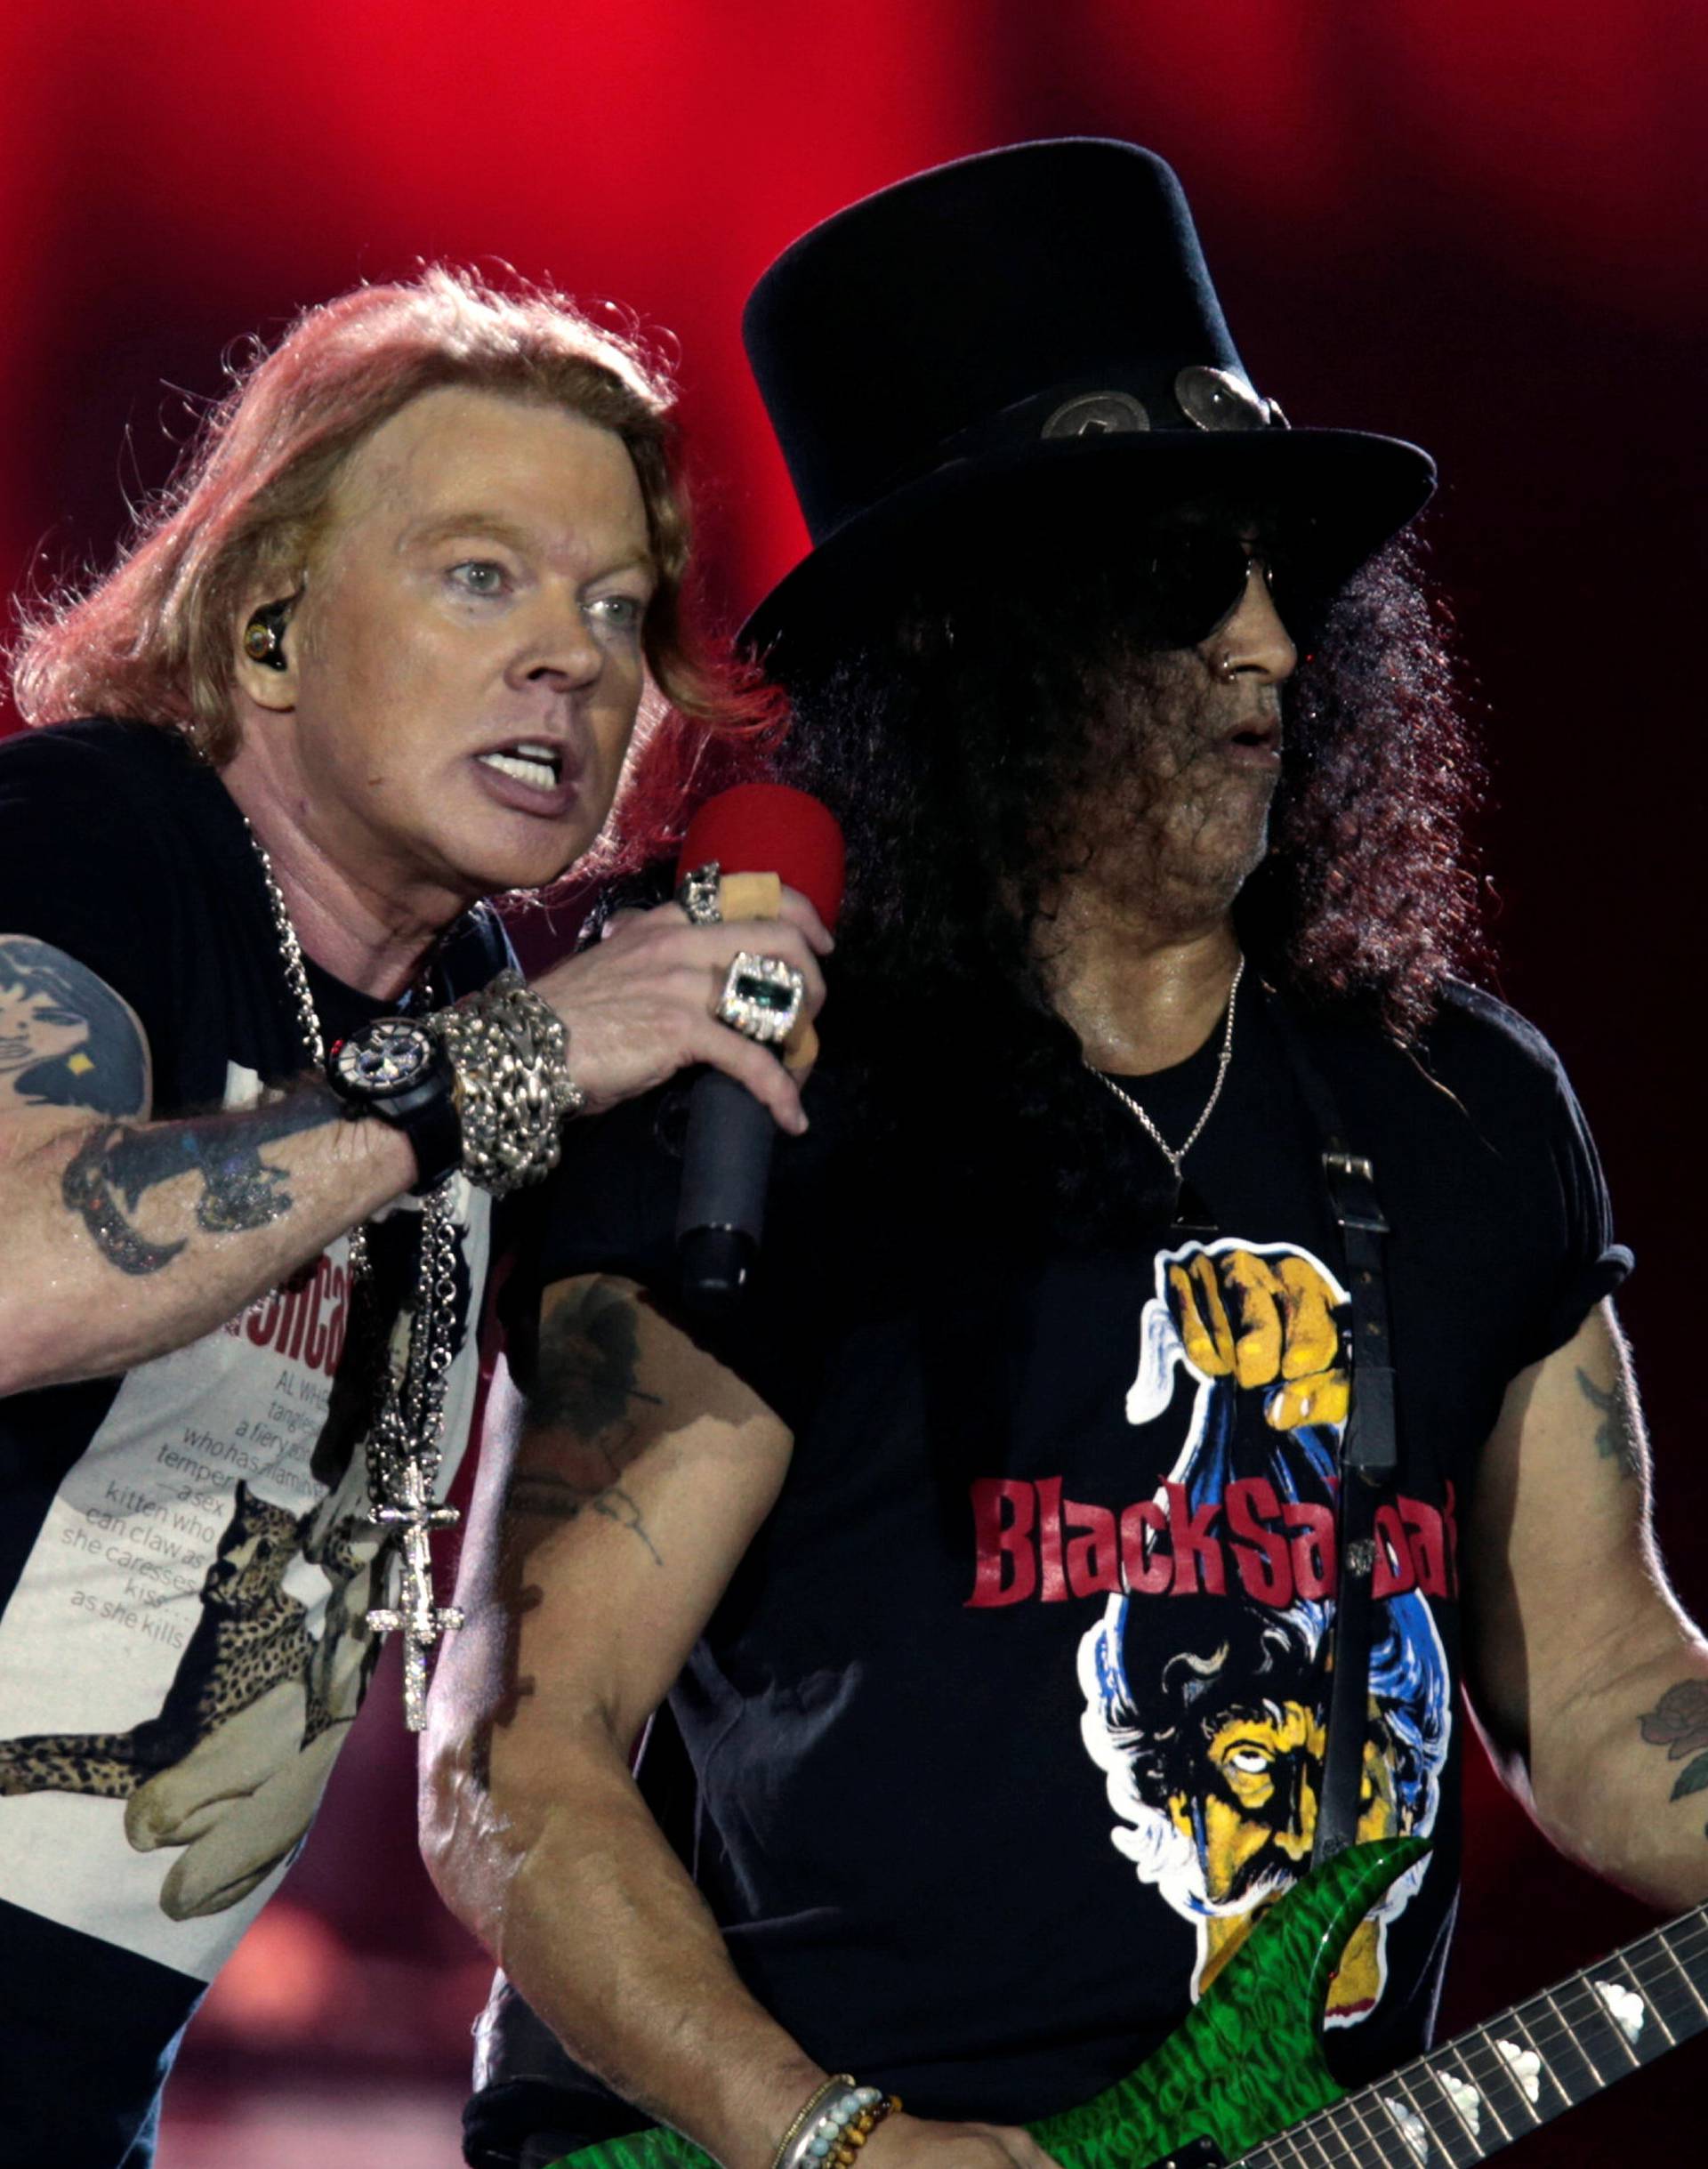 Axl Rose and Slash, lead singer and lead guitarist of U.S. rock band Guns N' Roses, perform during their "Not in This Lifetime... Tour" at the du Arena in Abu Dhabi